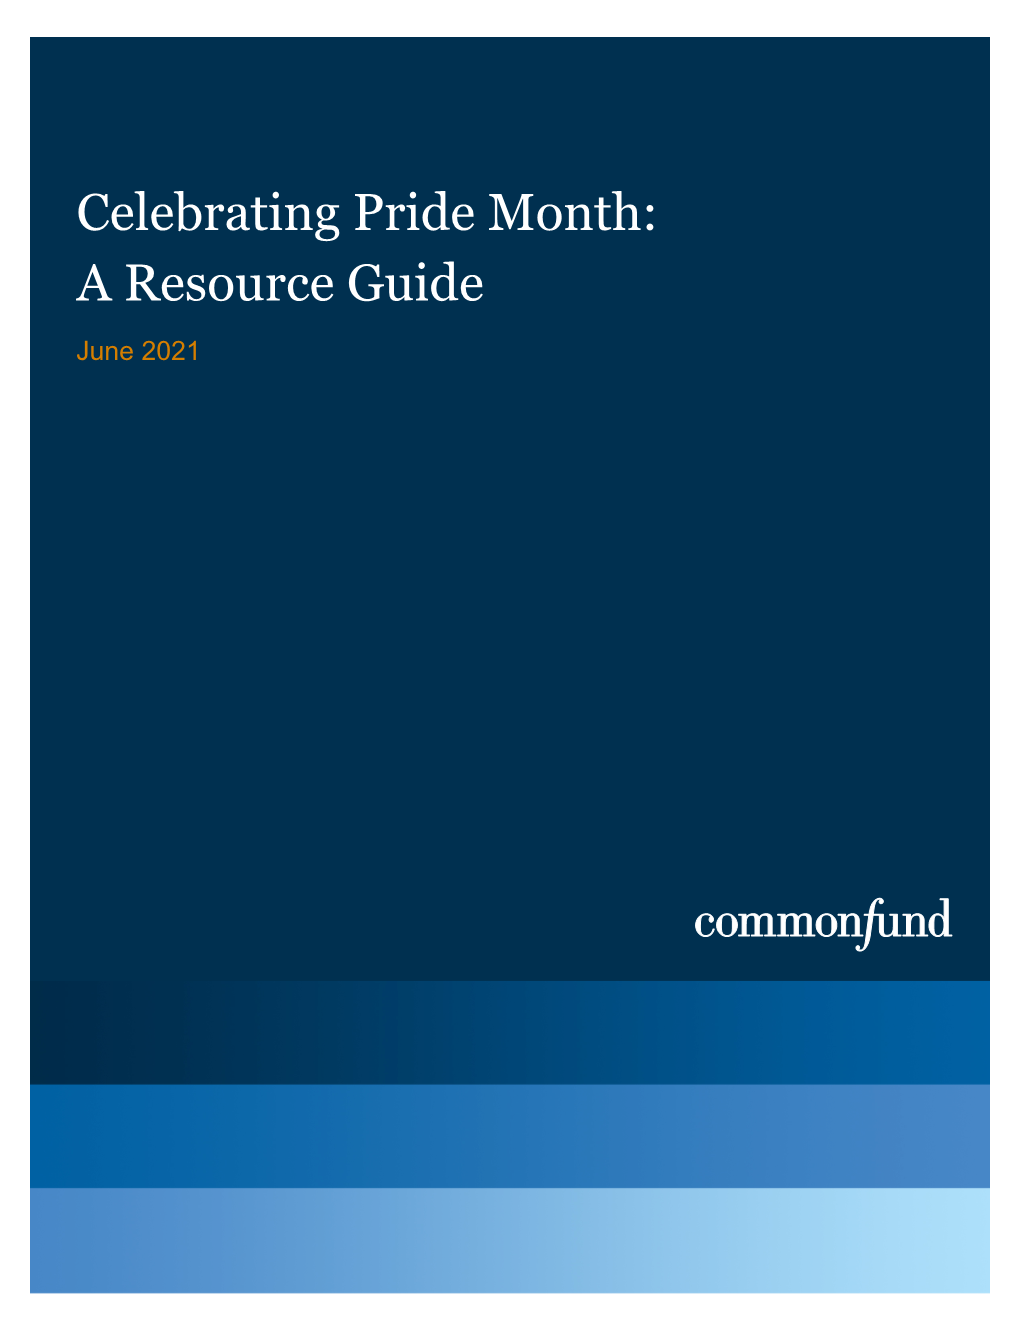 Celebrating Pride Month: a Resource Guide June 2021 Celebrating Pride Month: a Resource Guide